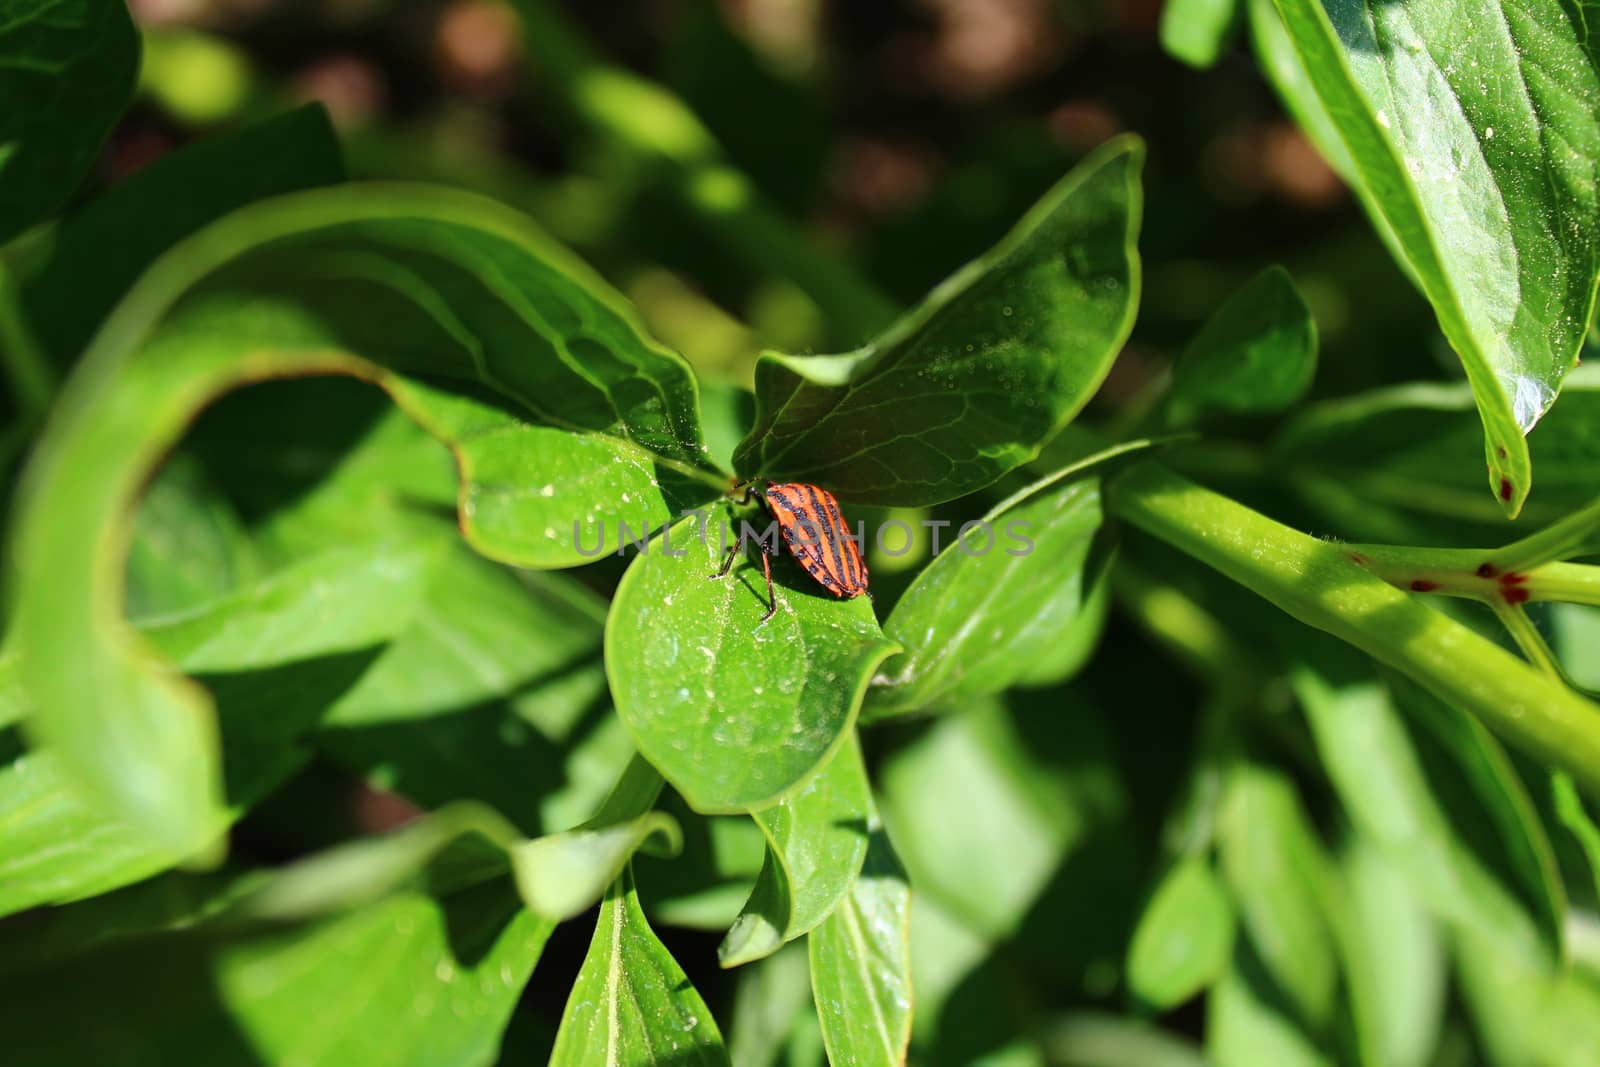 The picture shows a striped shield bug on a peony.